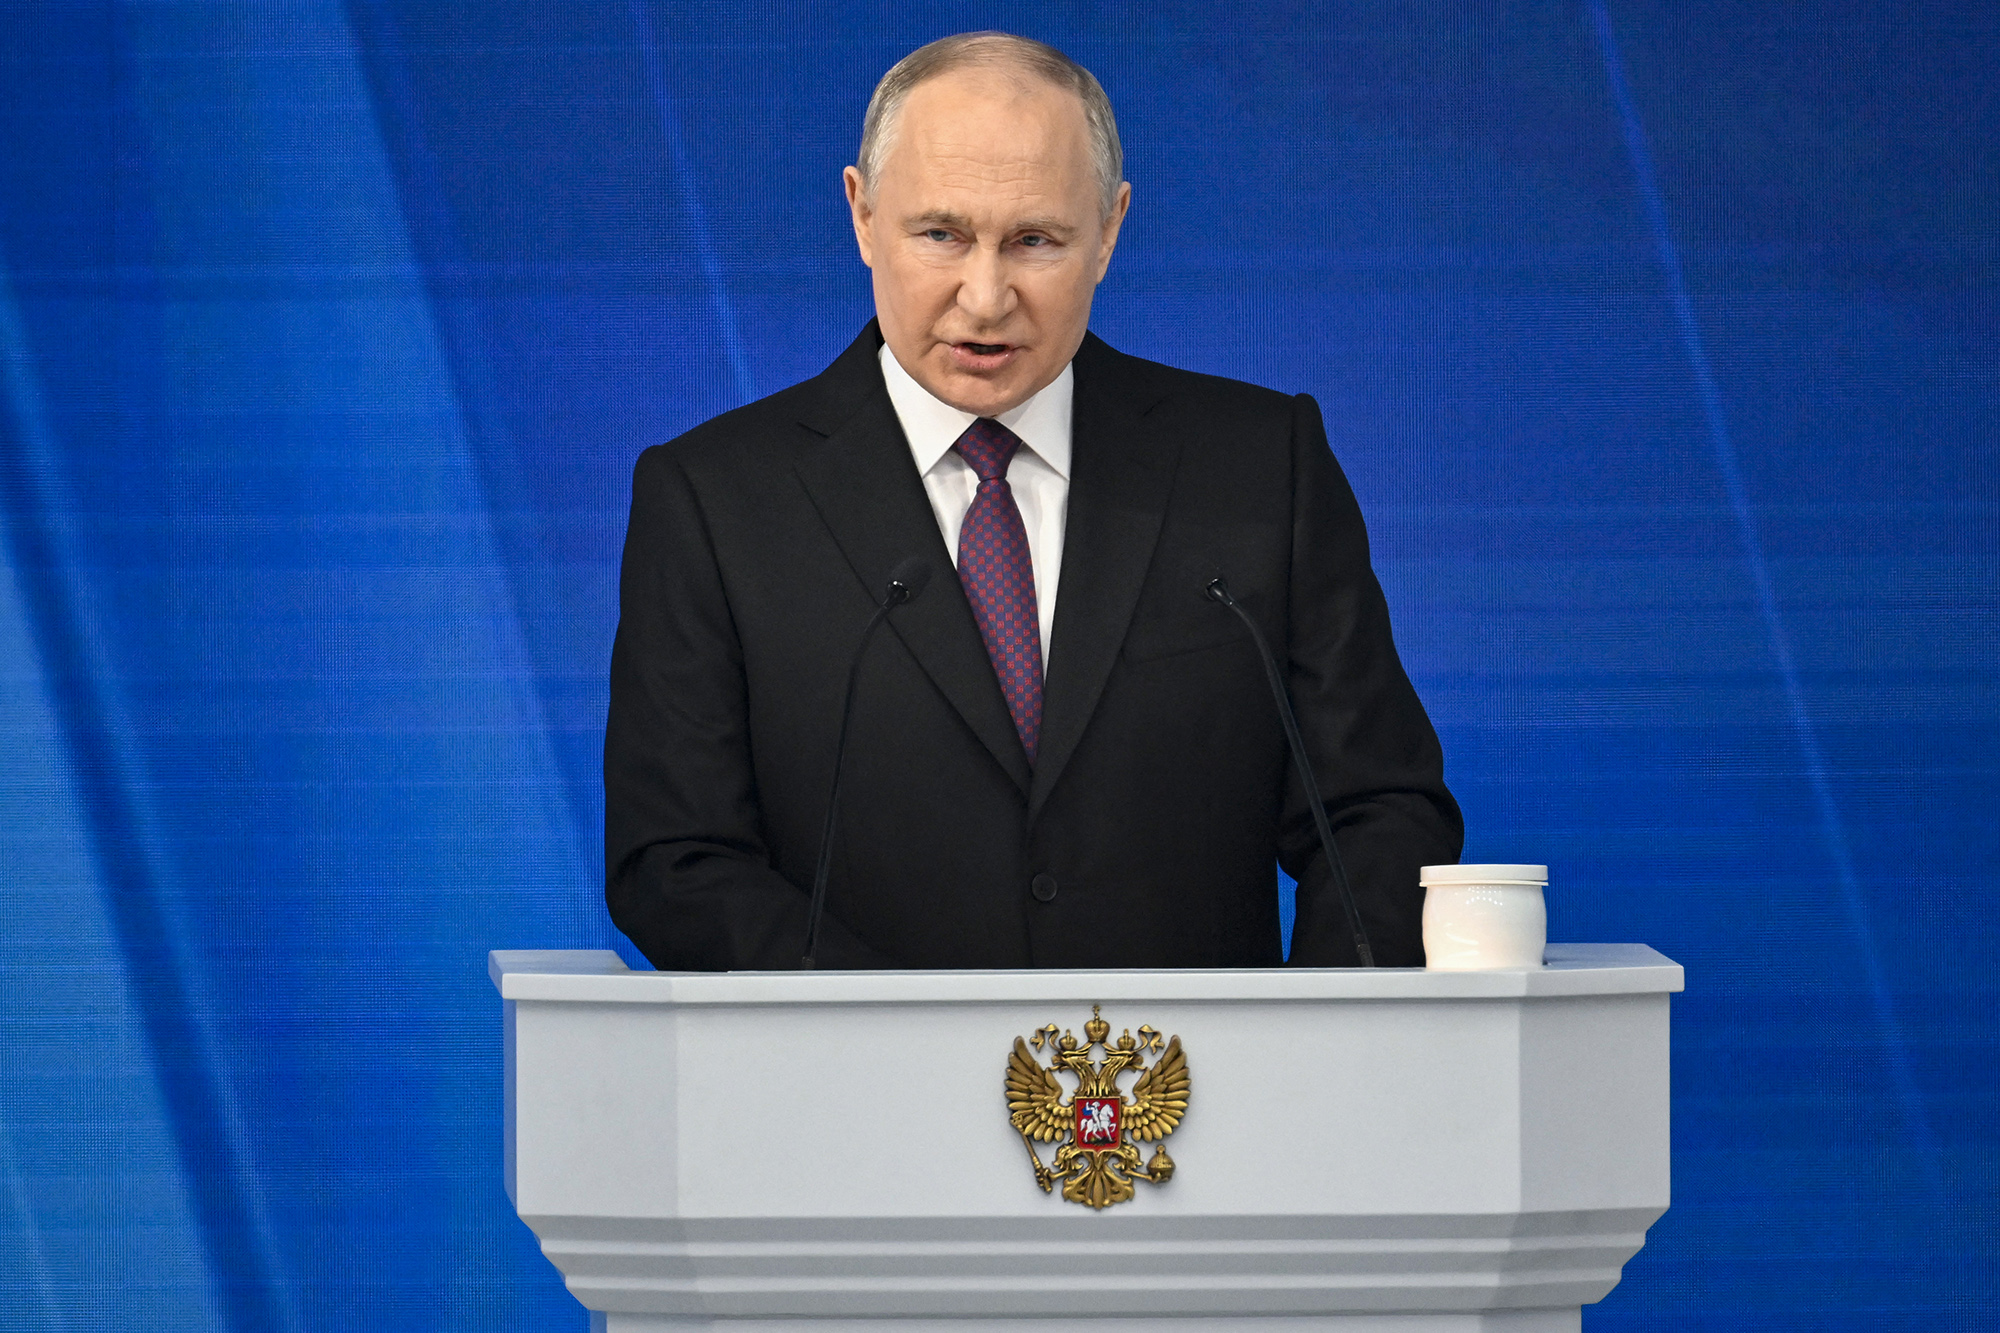 Russian President Vladimir Putin giving state of the nation address at Gostiny Dvor conference centre in Moscow.